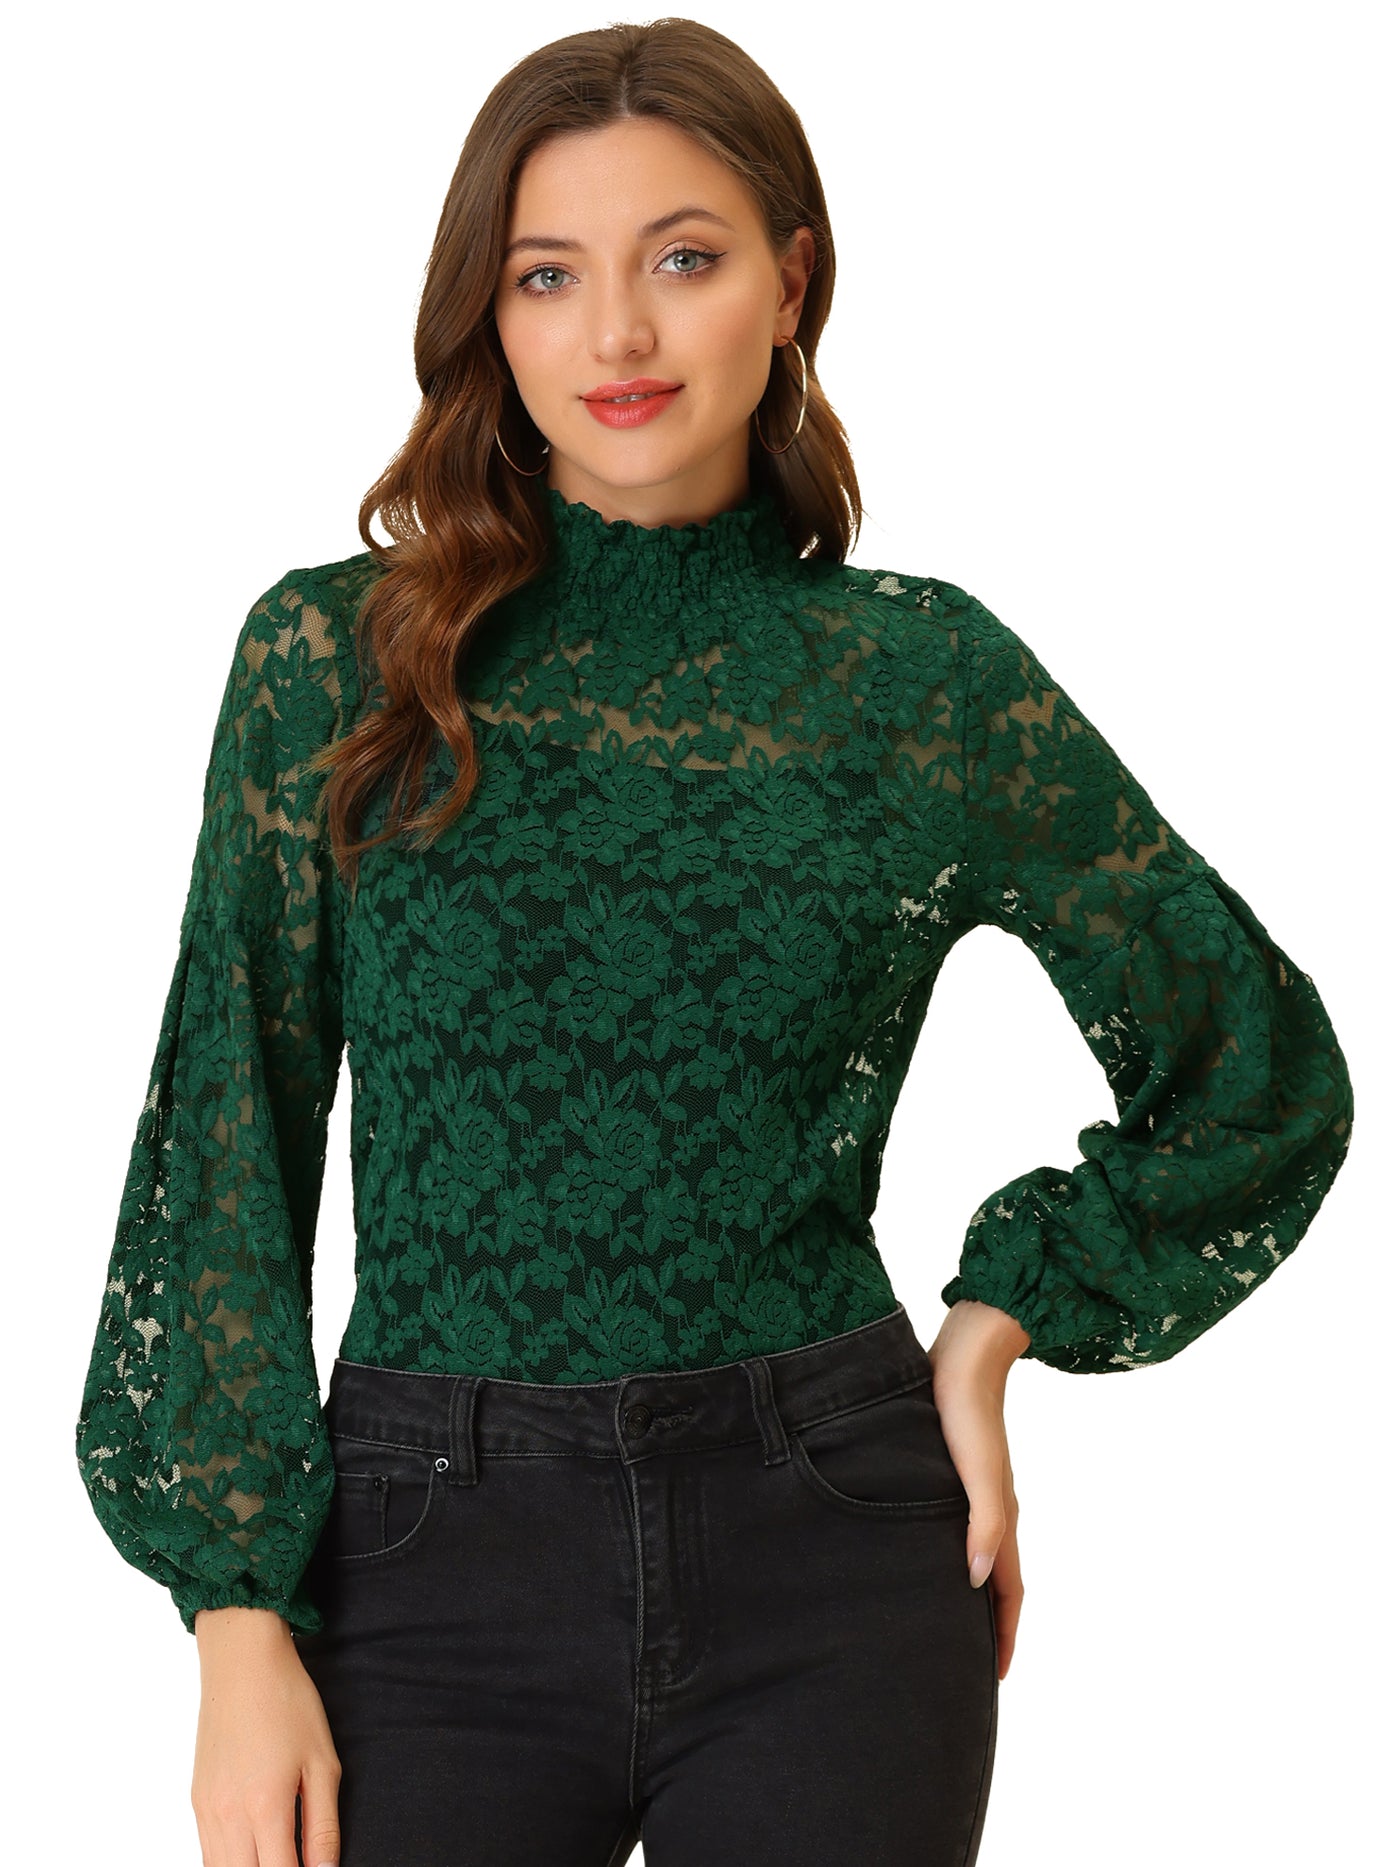 Allegra K Floral Lace Top Turtleneck Puff Long Sleeve See Through Sheer Blouse